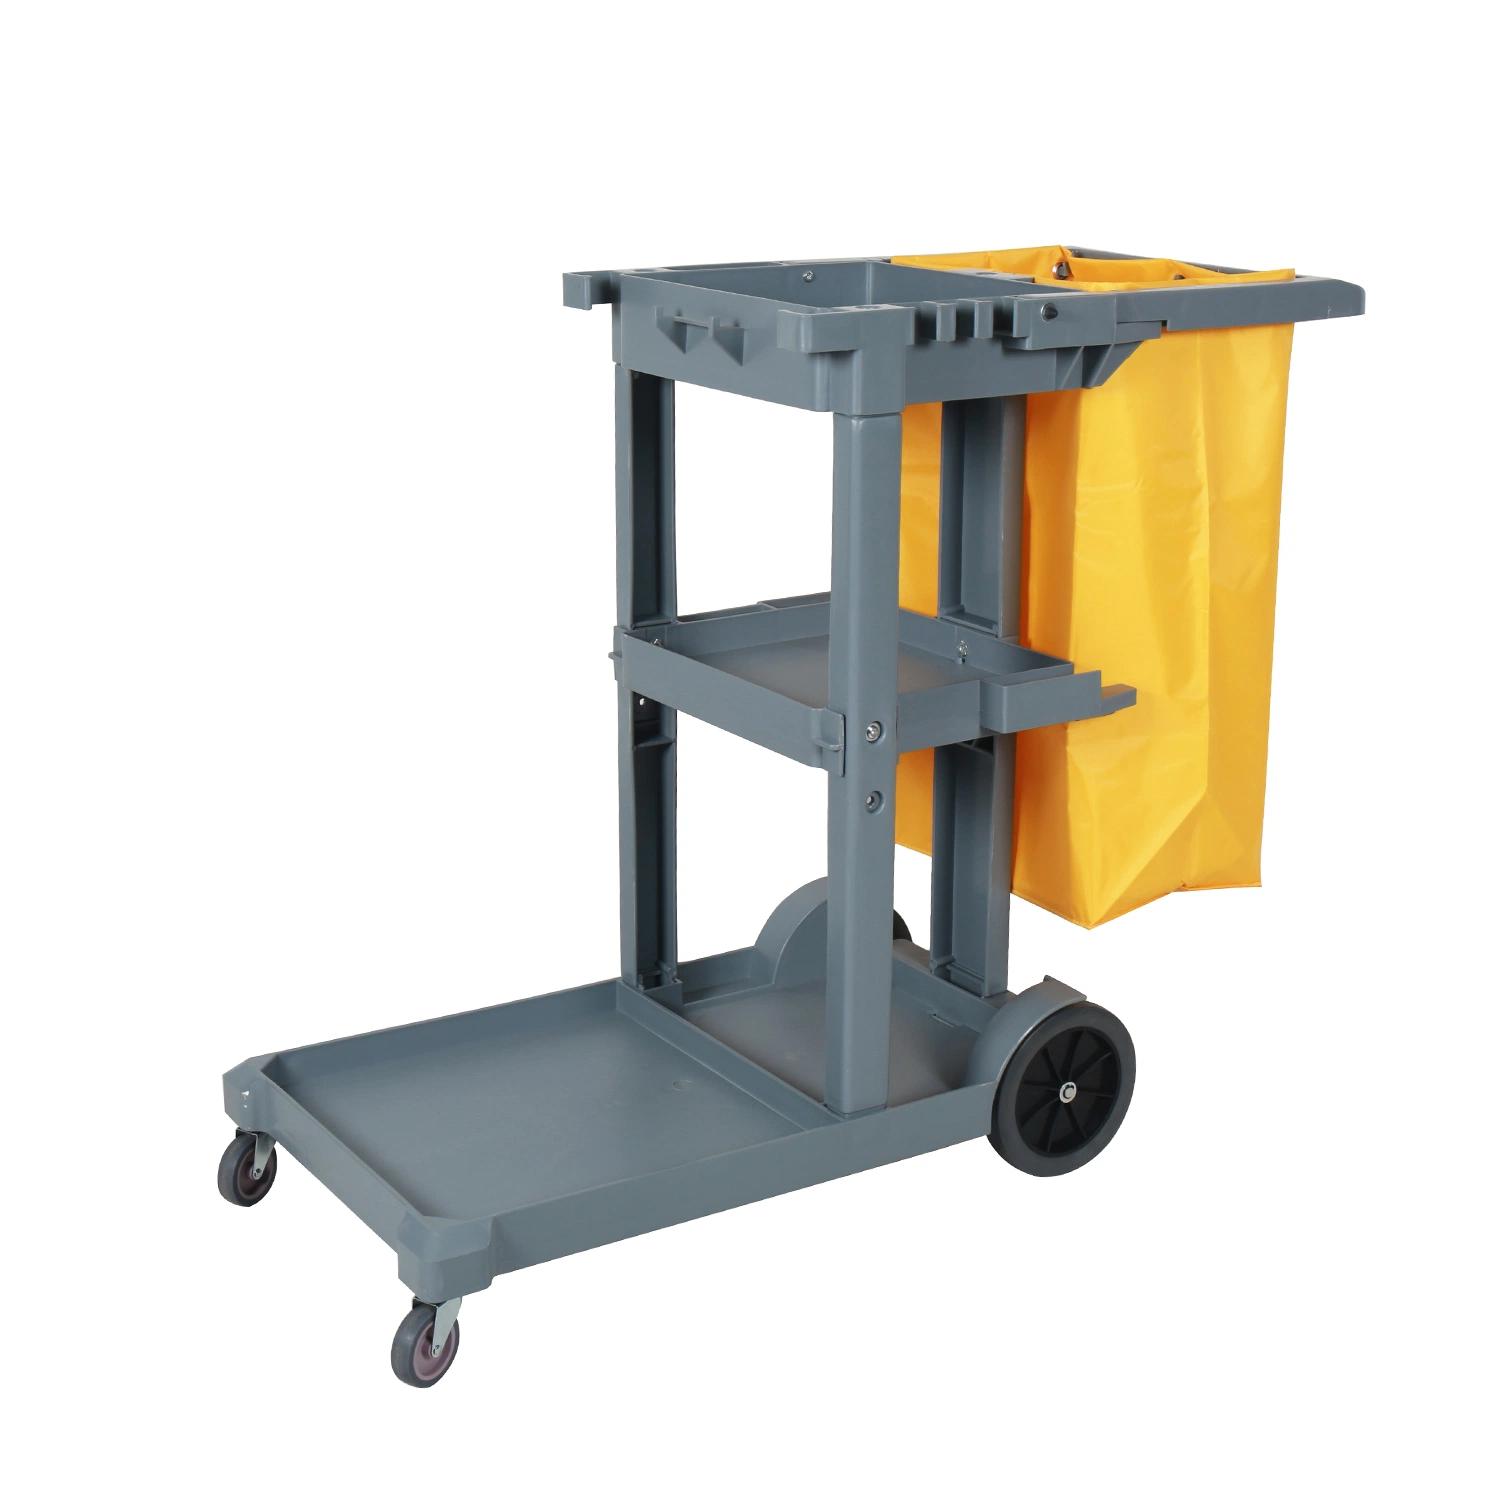 High Quality Plastic Room Service Janitor Cart Cleaning Folding Trolley Cart